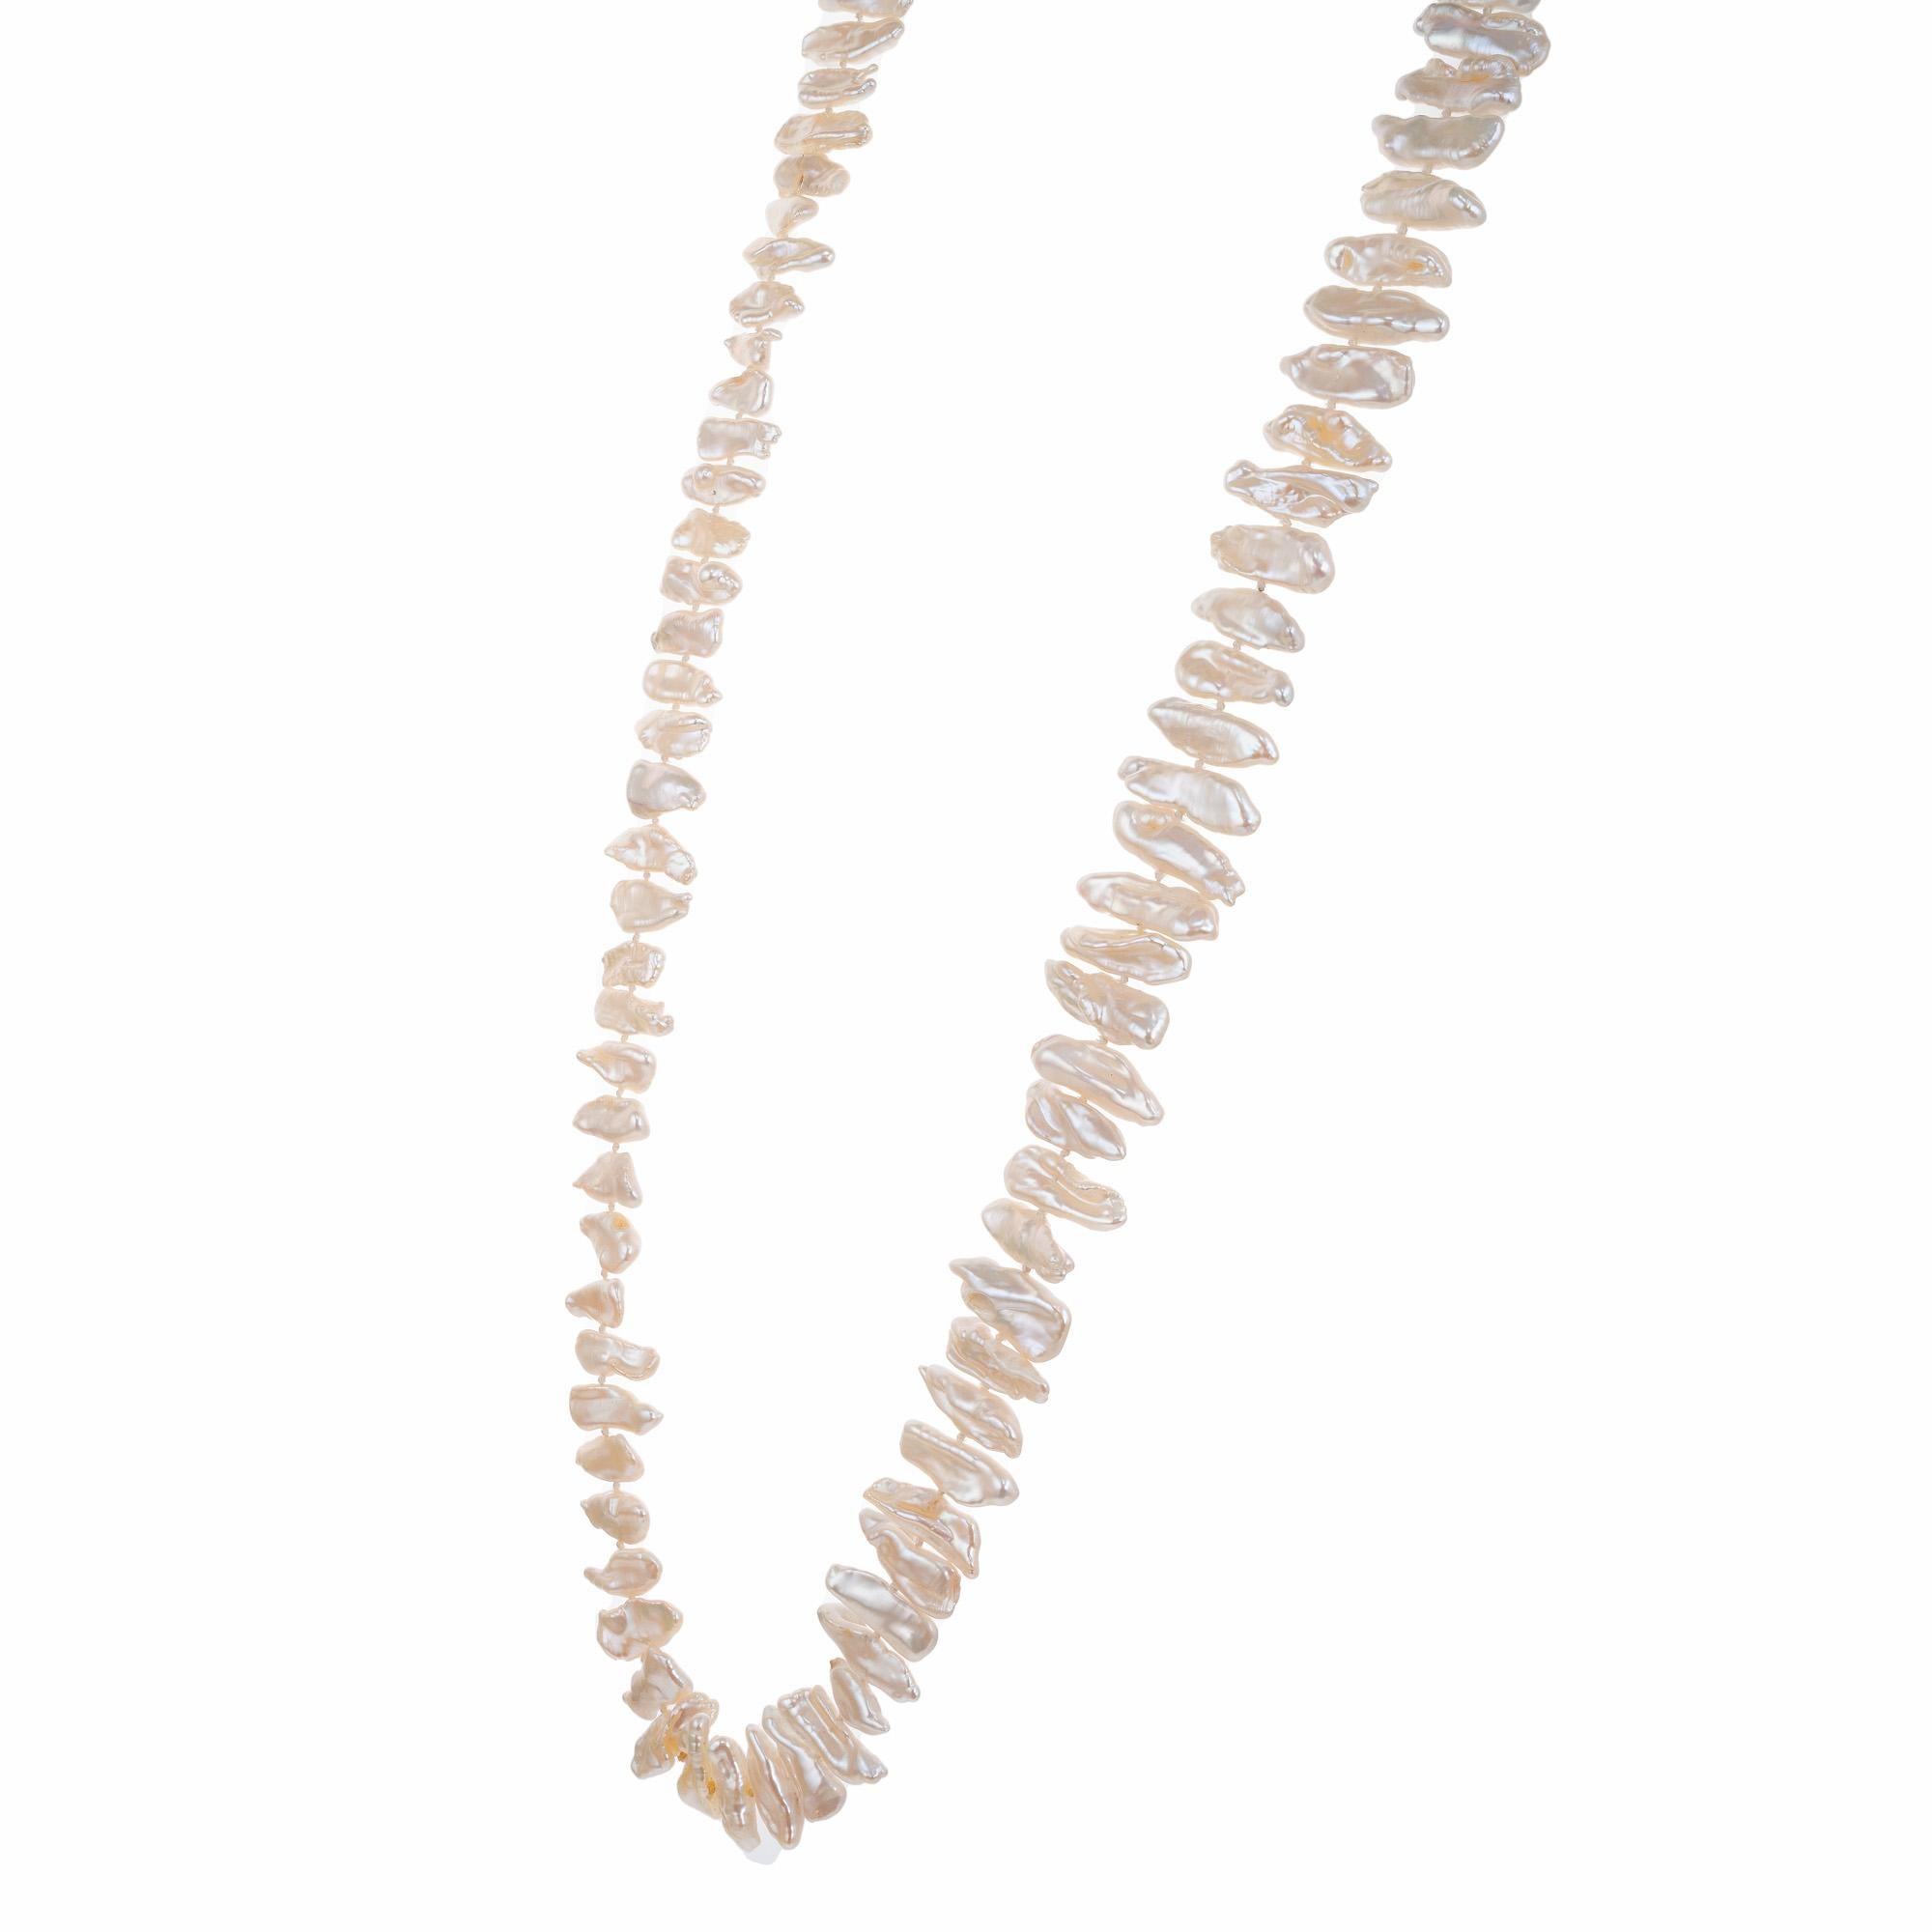 Indulge in the unique elegance of our GIA Certified Freshwater Baroque Pearl Necklace. This necklace is strung with 96 creme white, freshwater pearls showcasing their distinctive shape and iridescence. 28 inches in length. The GIA certified as